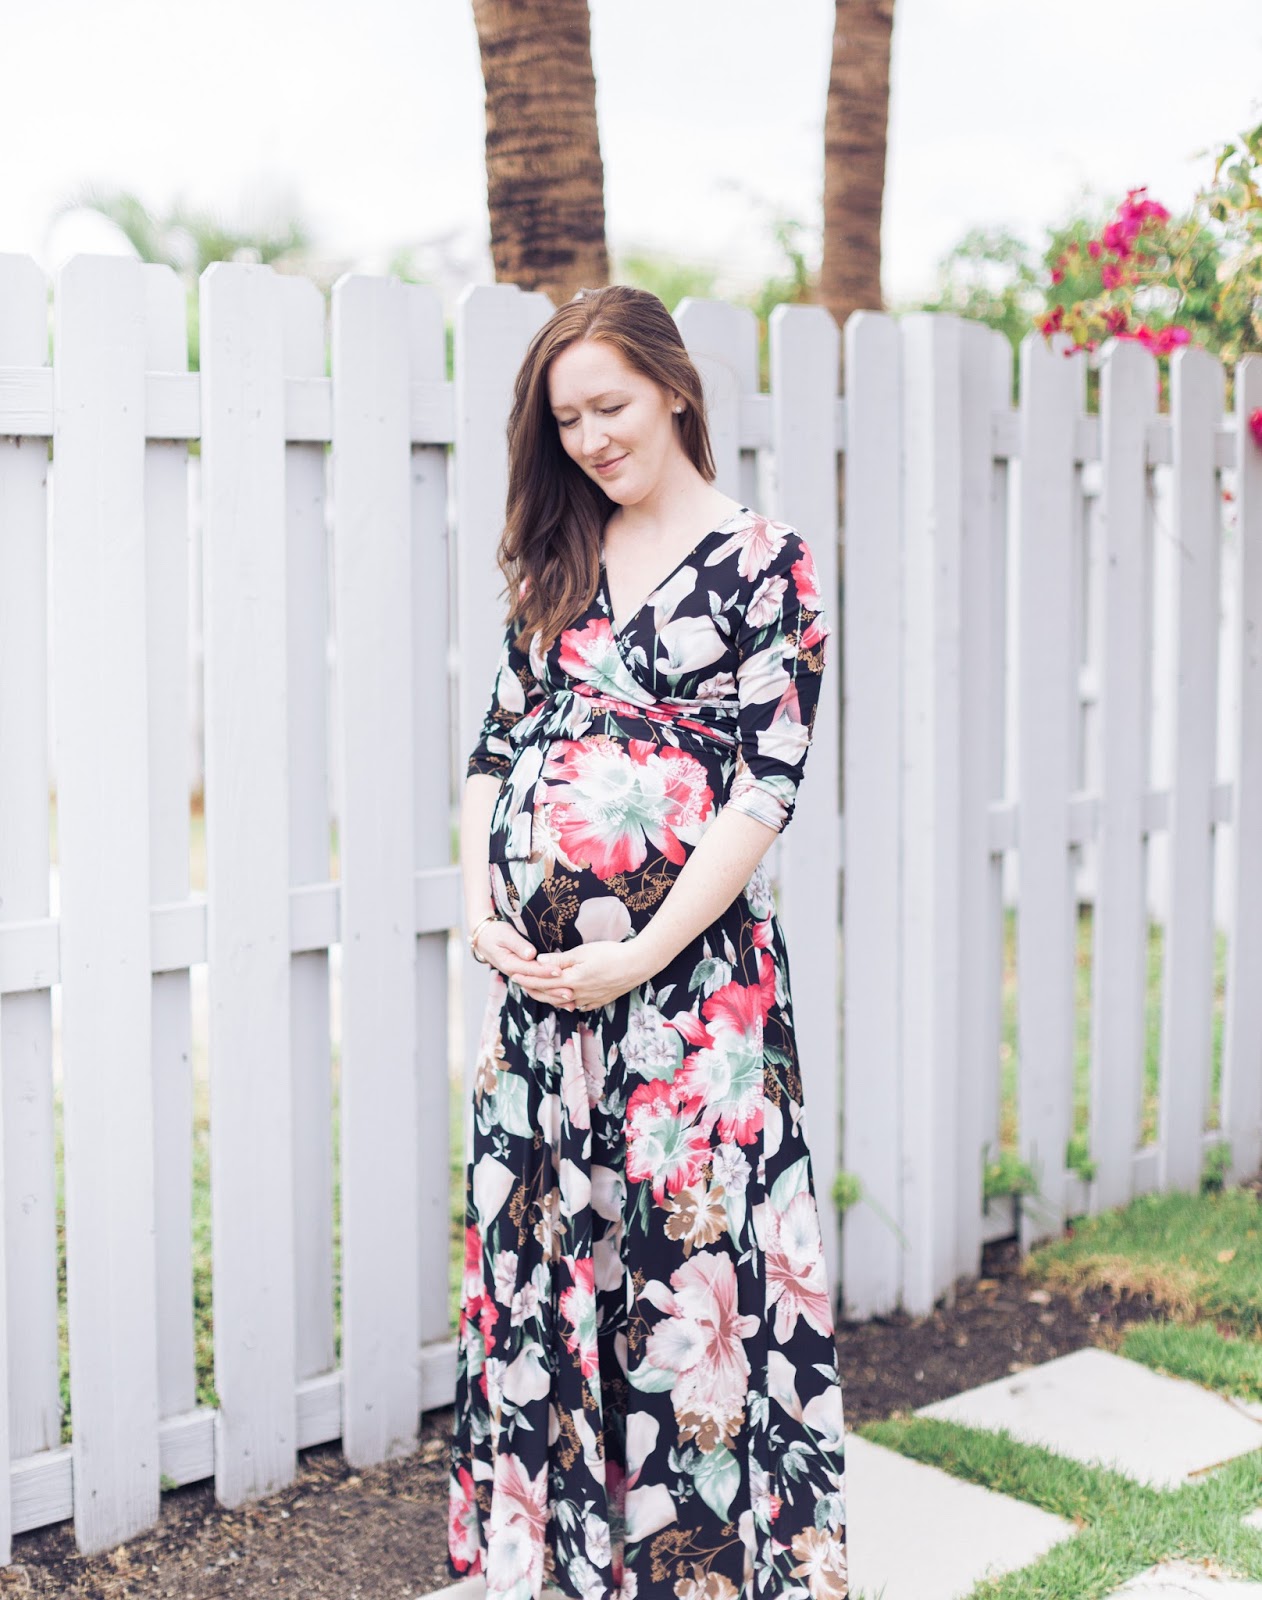 Our Miscarriage Experience by popular blogger, The Celebration Stylist